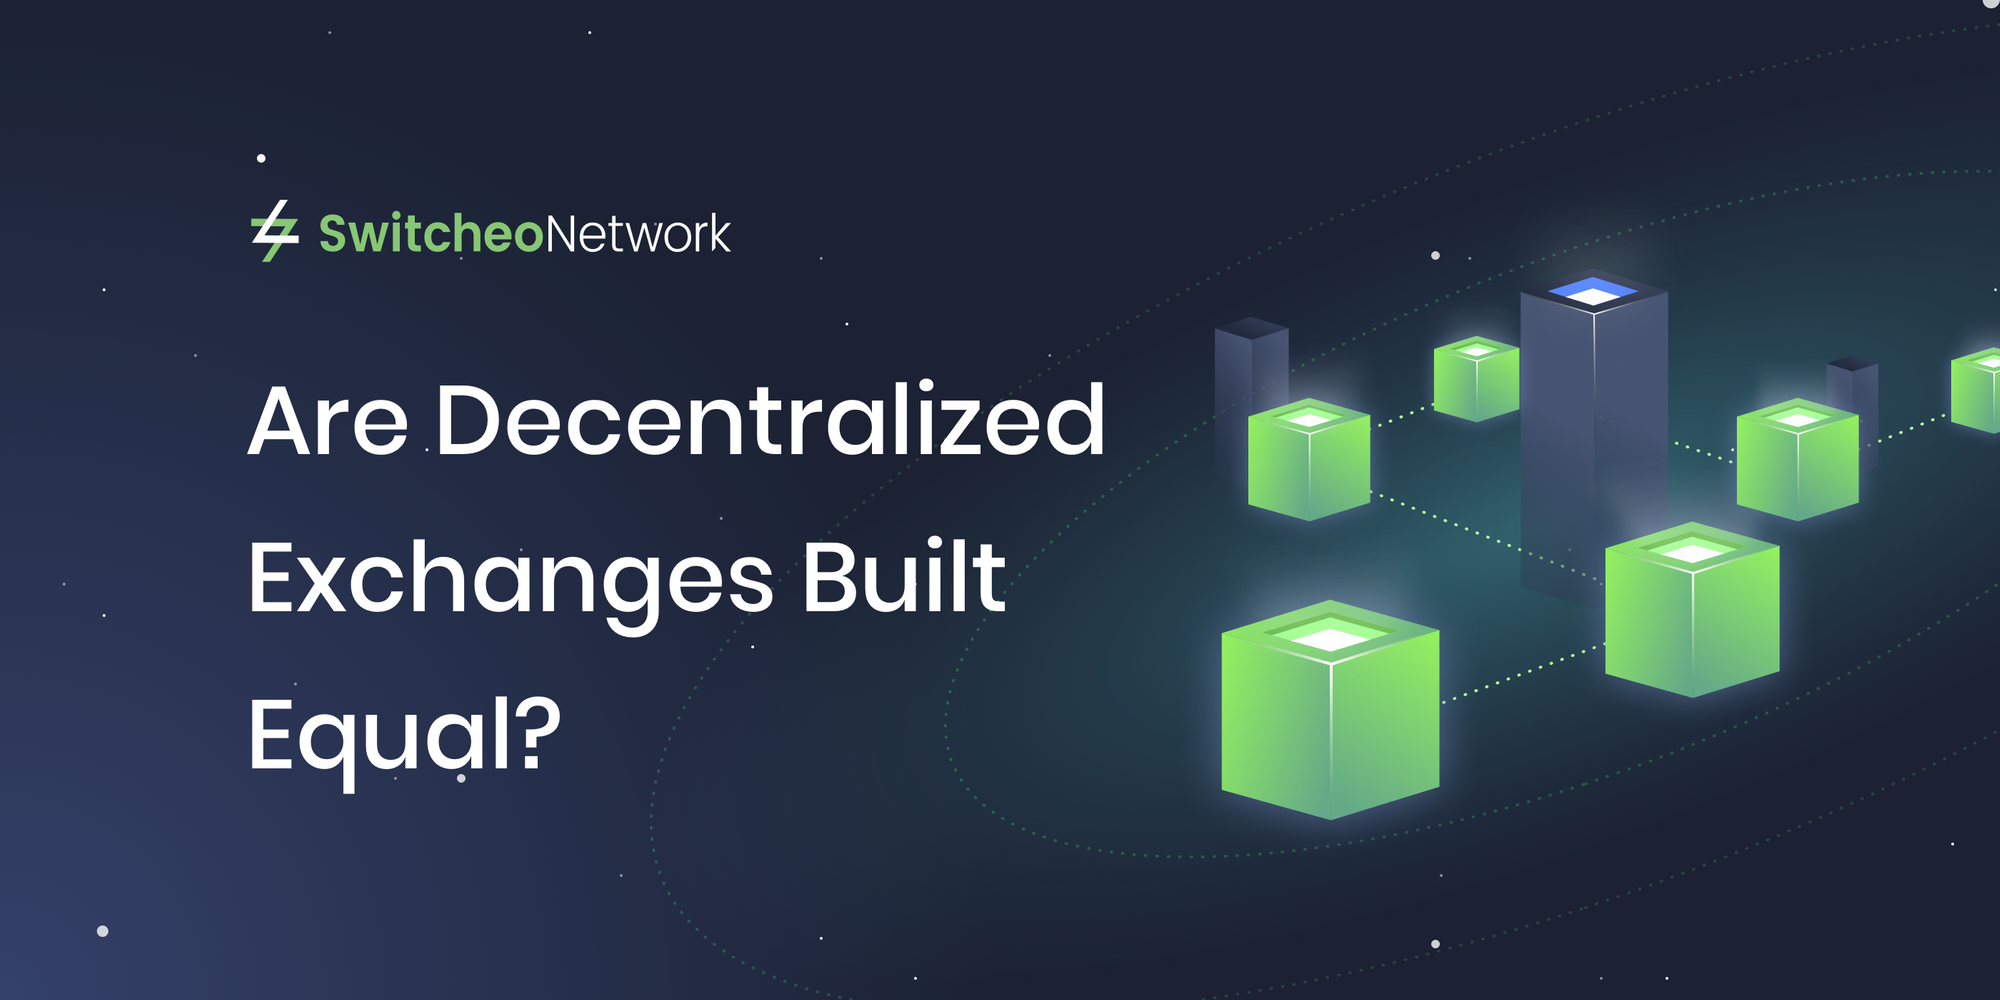 Are Decentralized Exchanges Built Equal?